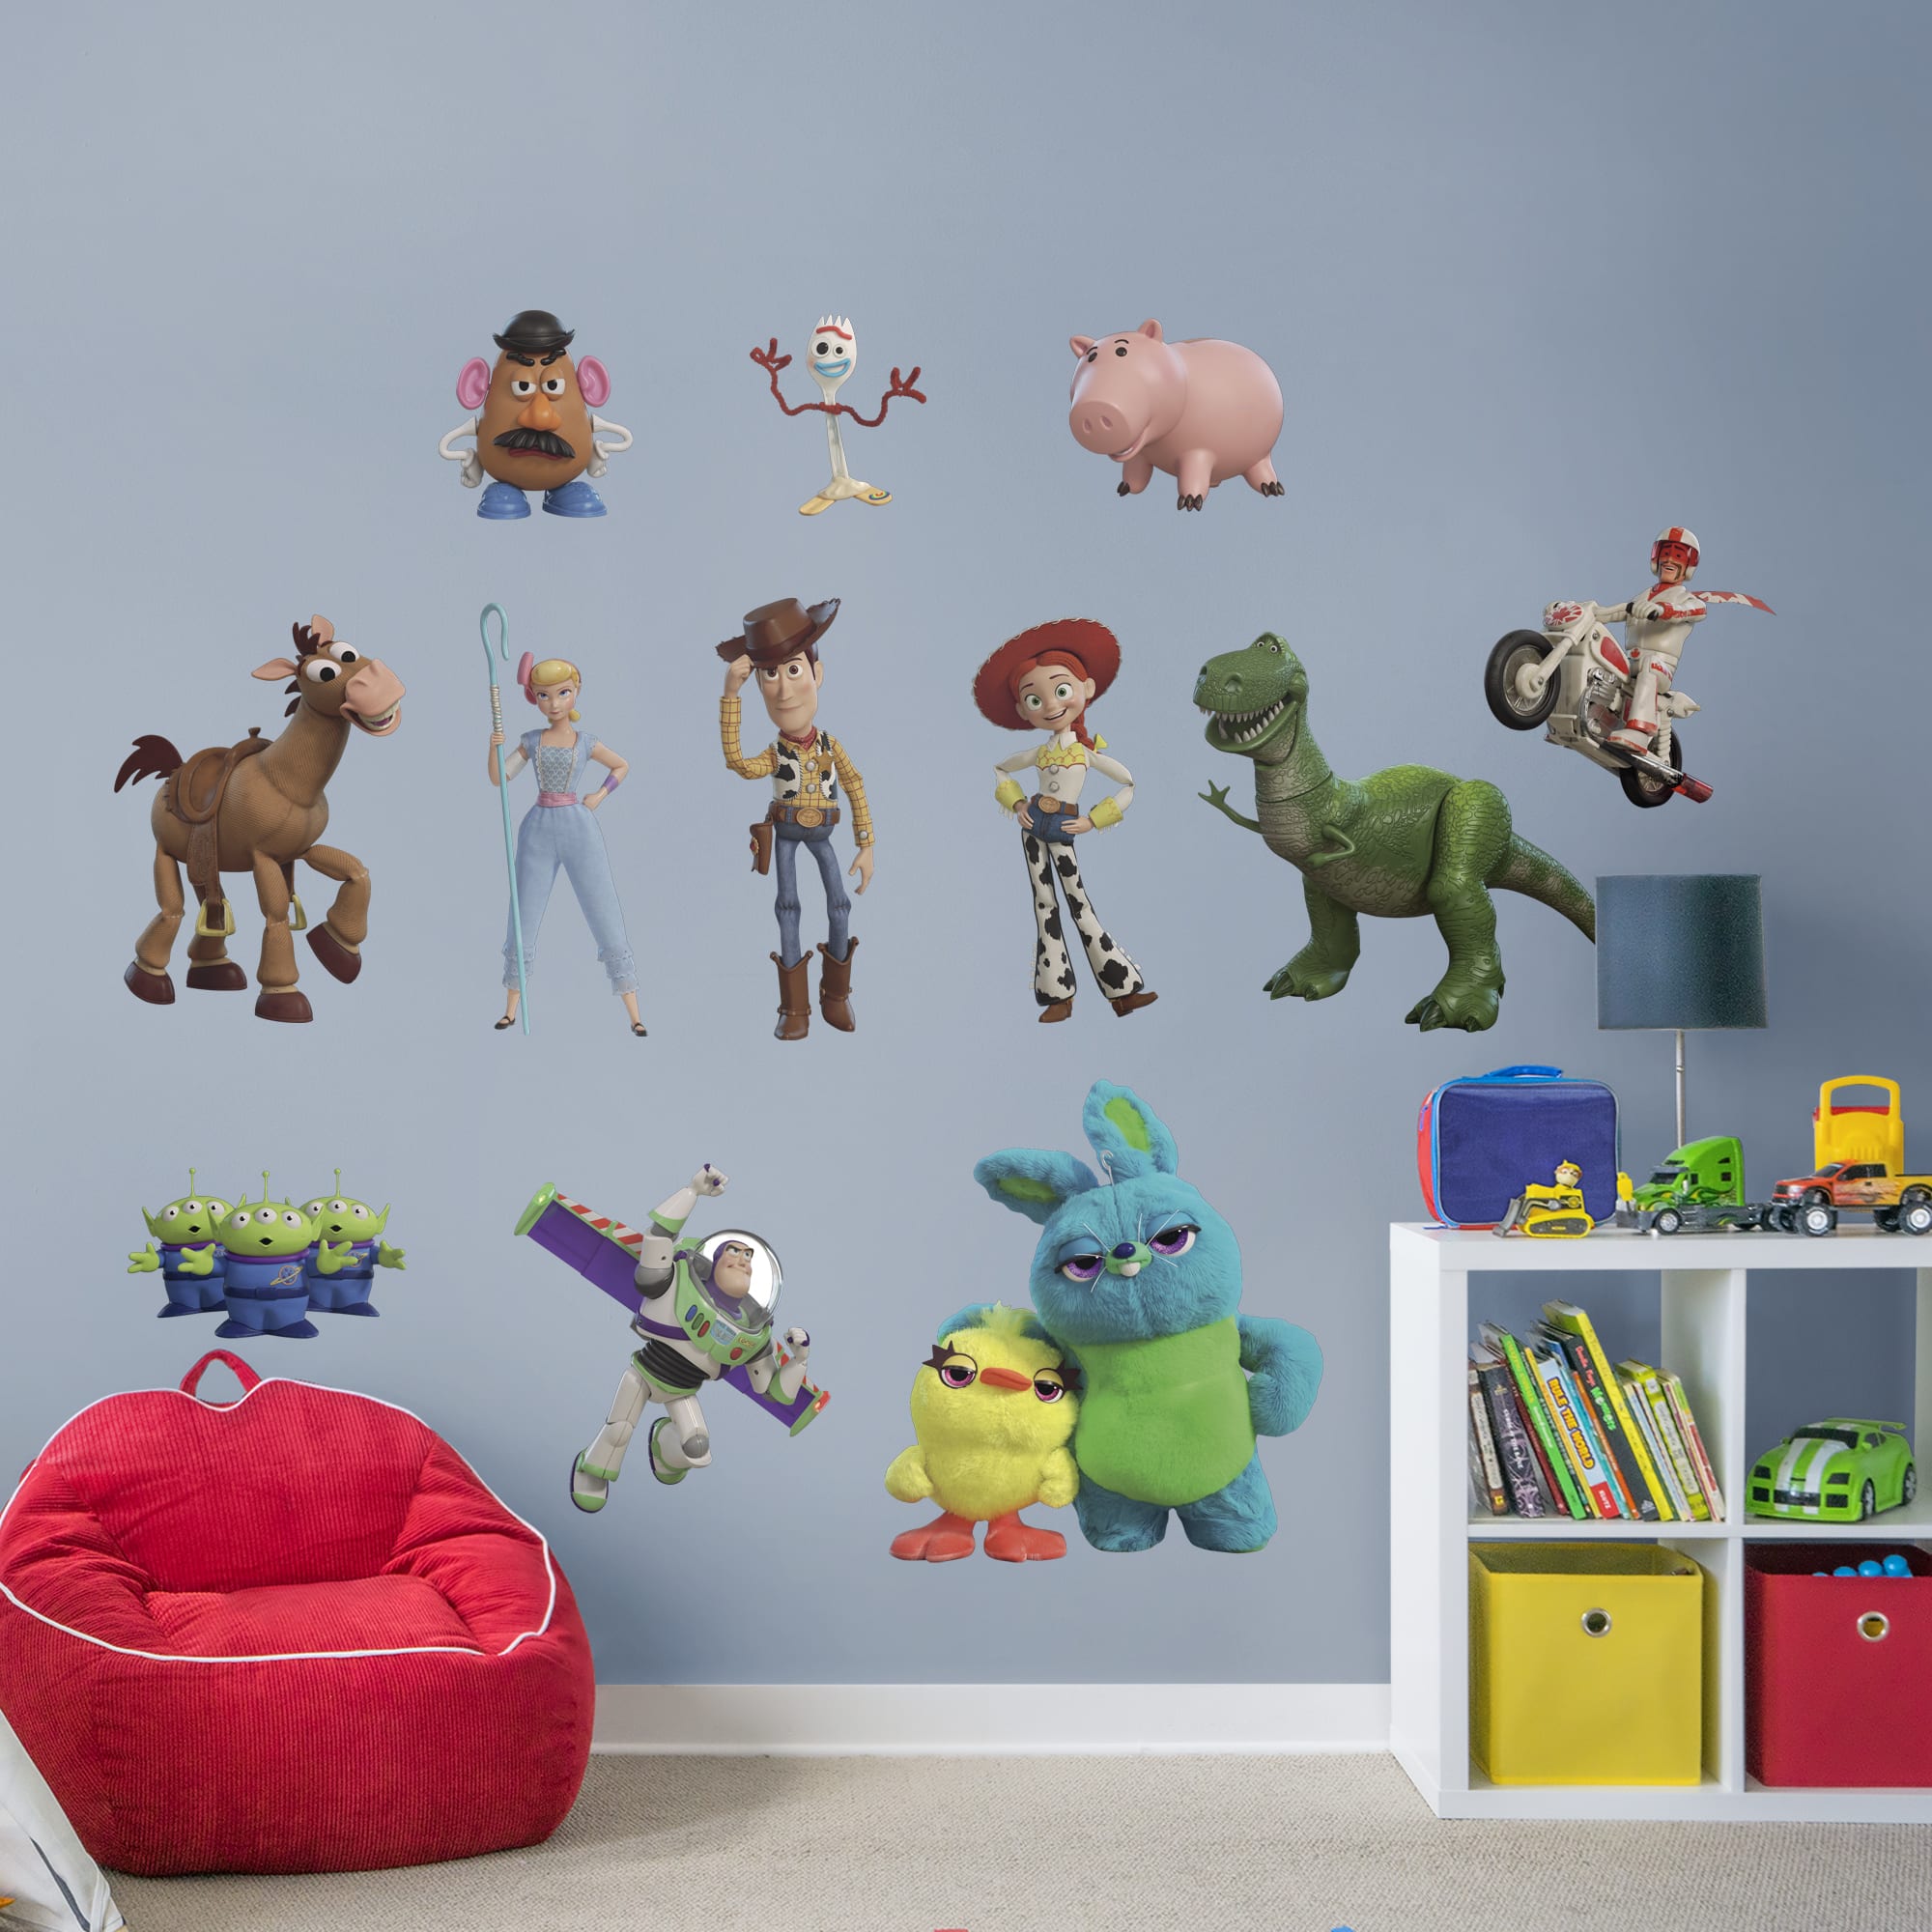 Toy Story 4: Collection - Officially Licensed Disney/PIXAR Removable Wall Decals 30.0"W x 30.0"H by Fathead | Vinyl